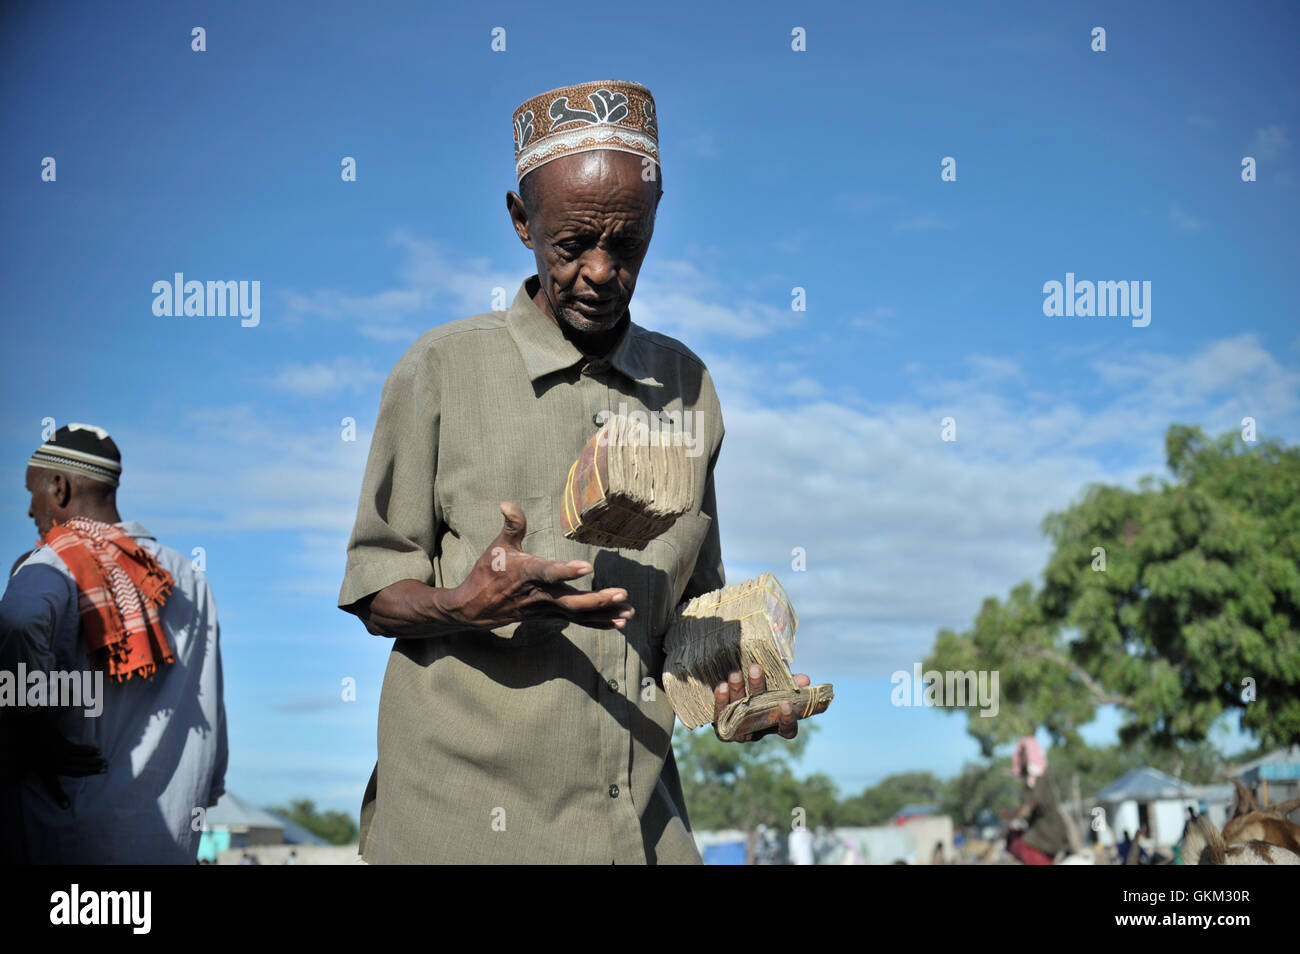 A Somali man carries the money he earned from selling goats at Bakara Animal Market in Mogadishu, Somalia, on April 13. Once notorious for being both the site of Black Hawk Down, in which 18 American soldiers were killed in 1993, and later as an al-Shabaab stronghold, Bakara market is now slowly losing its past notoriety and becoming better known for its thriving economy. In the district's animal market, thousands of goats are now brought each morning, where they are sold on to later be slaughtered for their meat. AU UN IST PHOTO / TOBIN JONES. Stock Photo